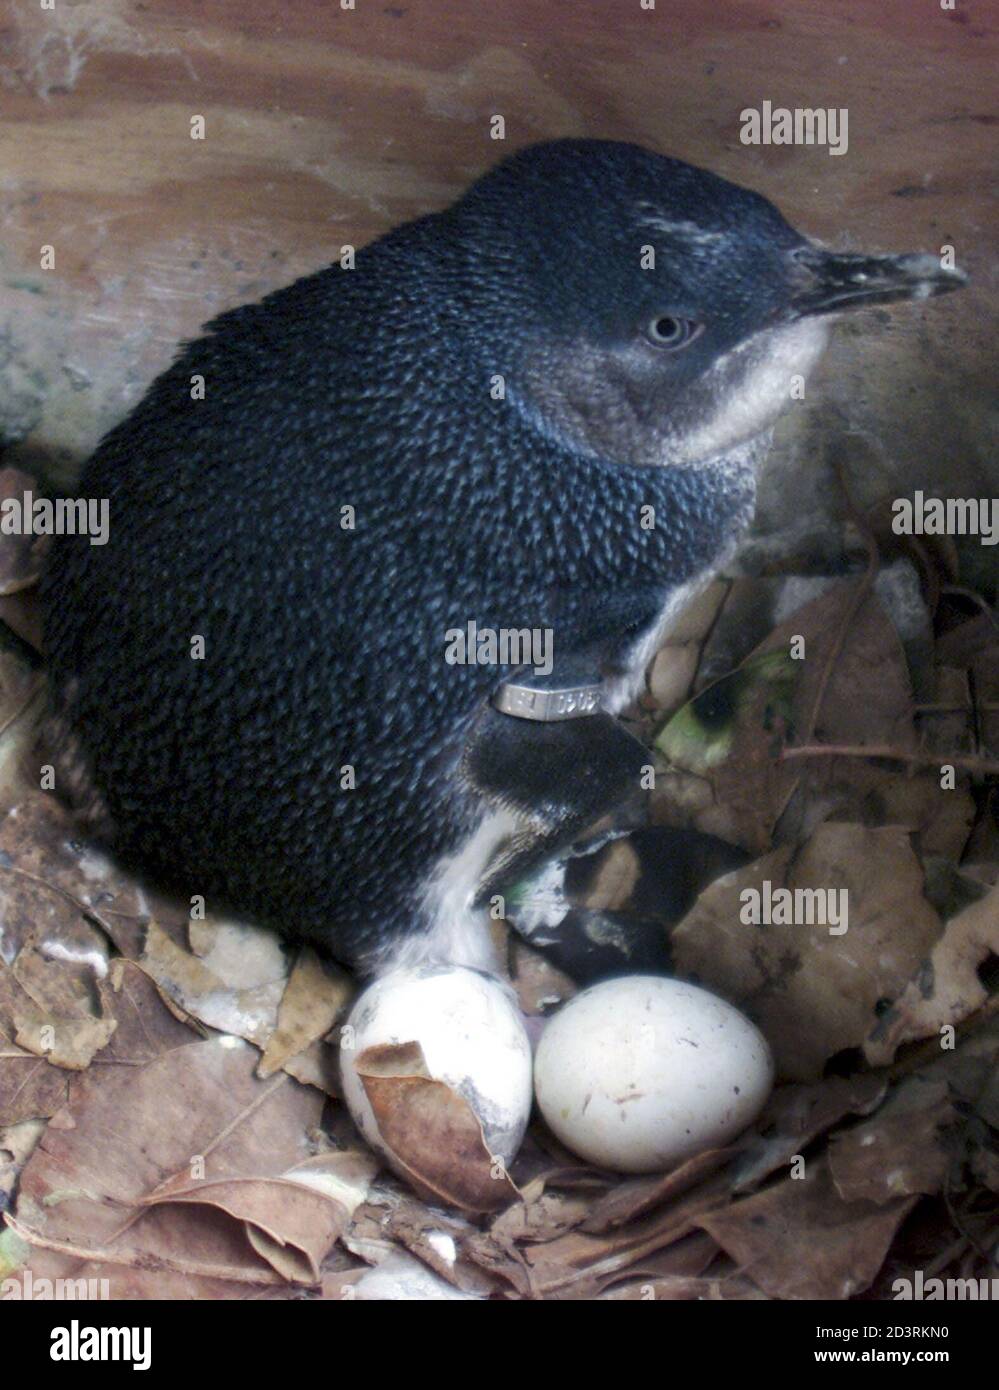 A Little Penguin or more commonly referred to as Fairy Penguin sits protecting her eggs in a man-made hutch on the foreshore of Sydney Harbour October 25, 2001 as National Parks and Wildlife Serice (NPWS) officers conduct studies on the endangered species. The 70 breeding pairs of penguins is believed to be the only colony to inhabit a major city in the world, with the decline in the formerly extensive population believed to be attributed to habitat destruction by urban develoment and predation from cats and dogs. Stock Photo